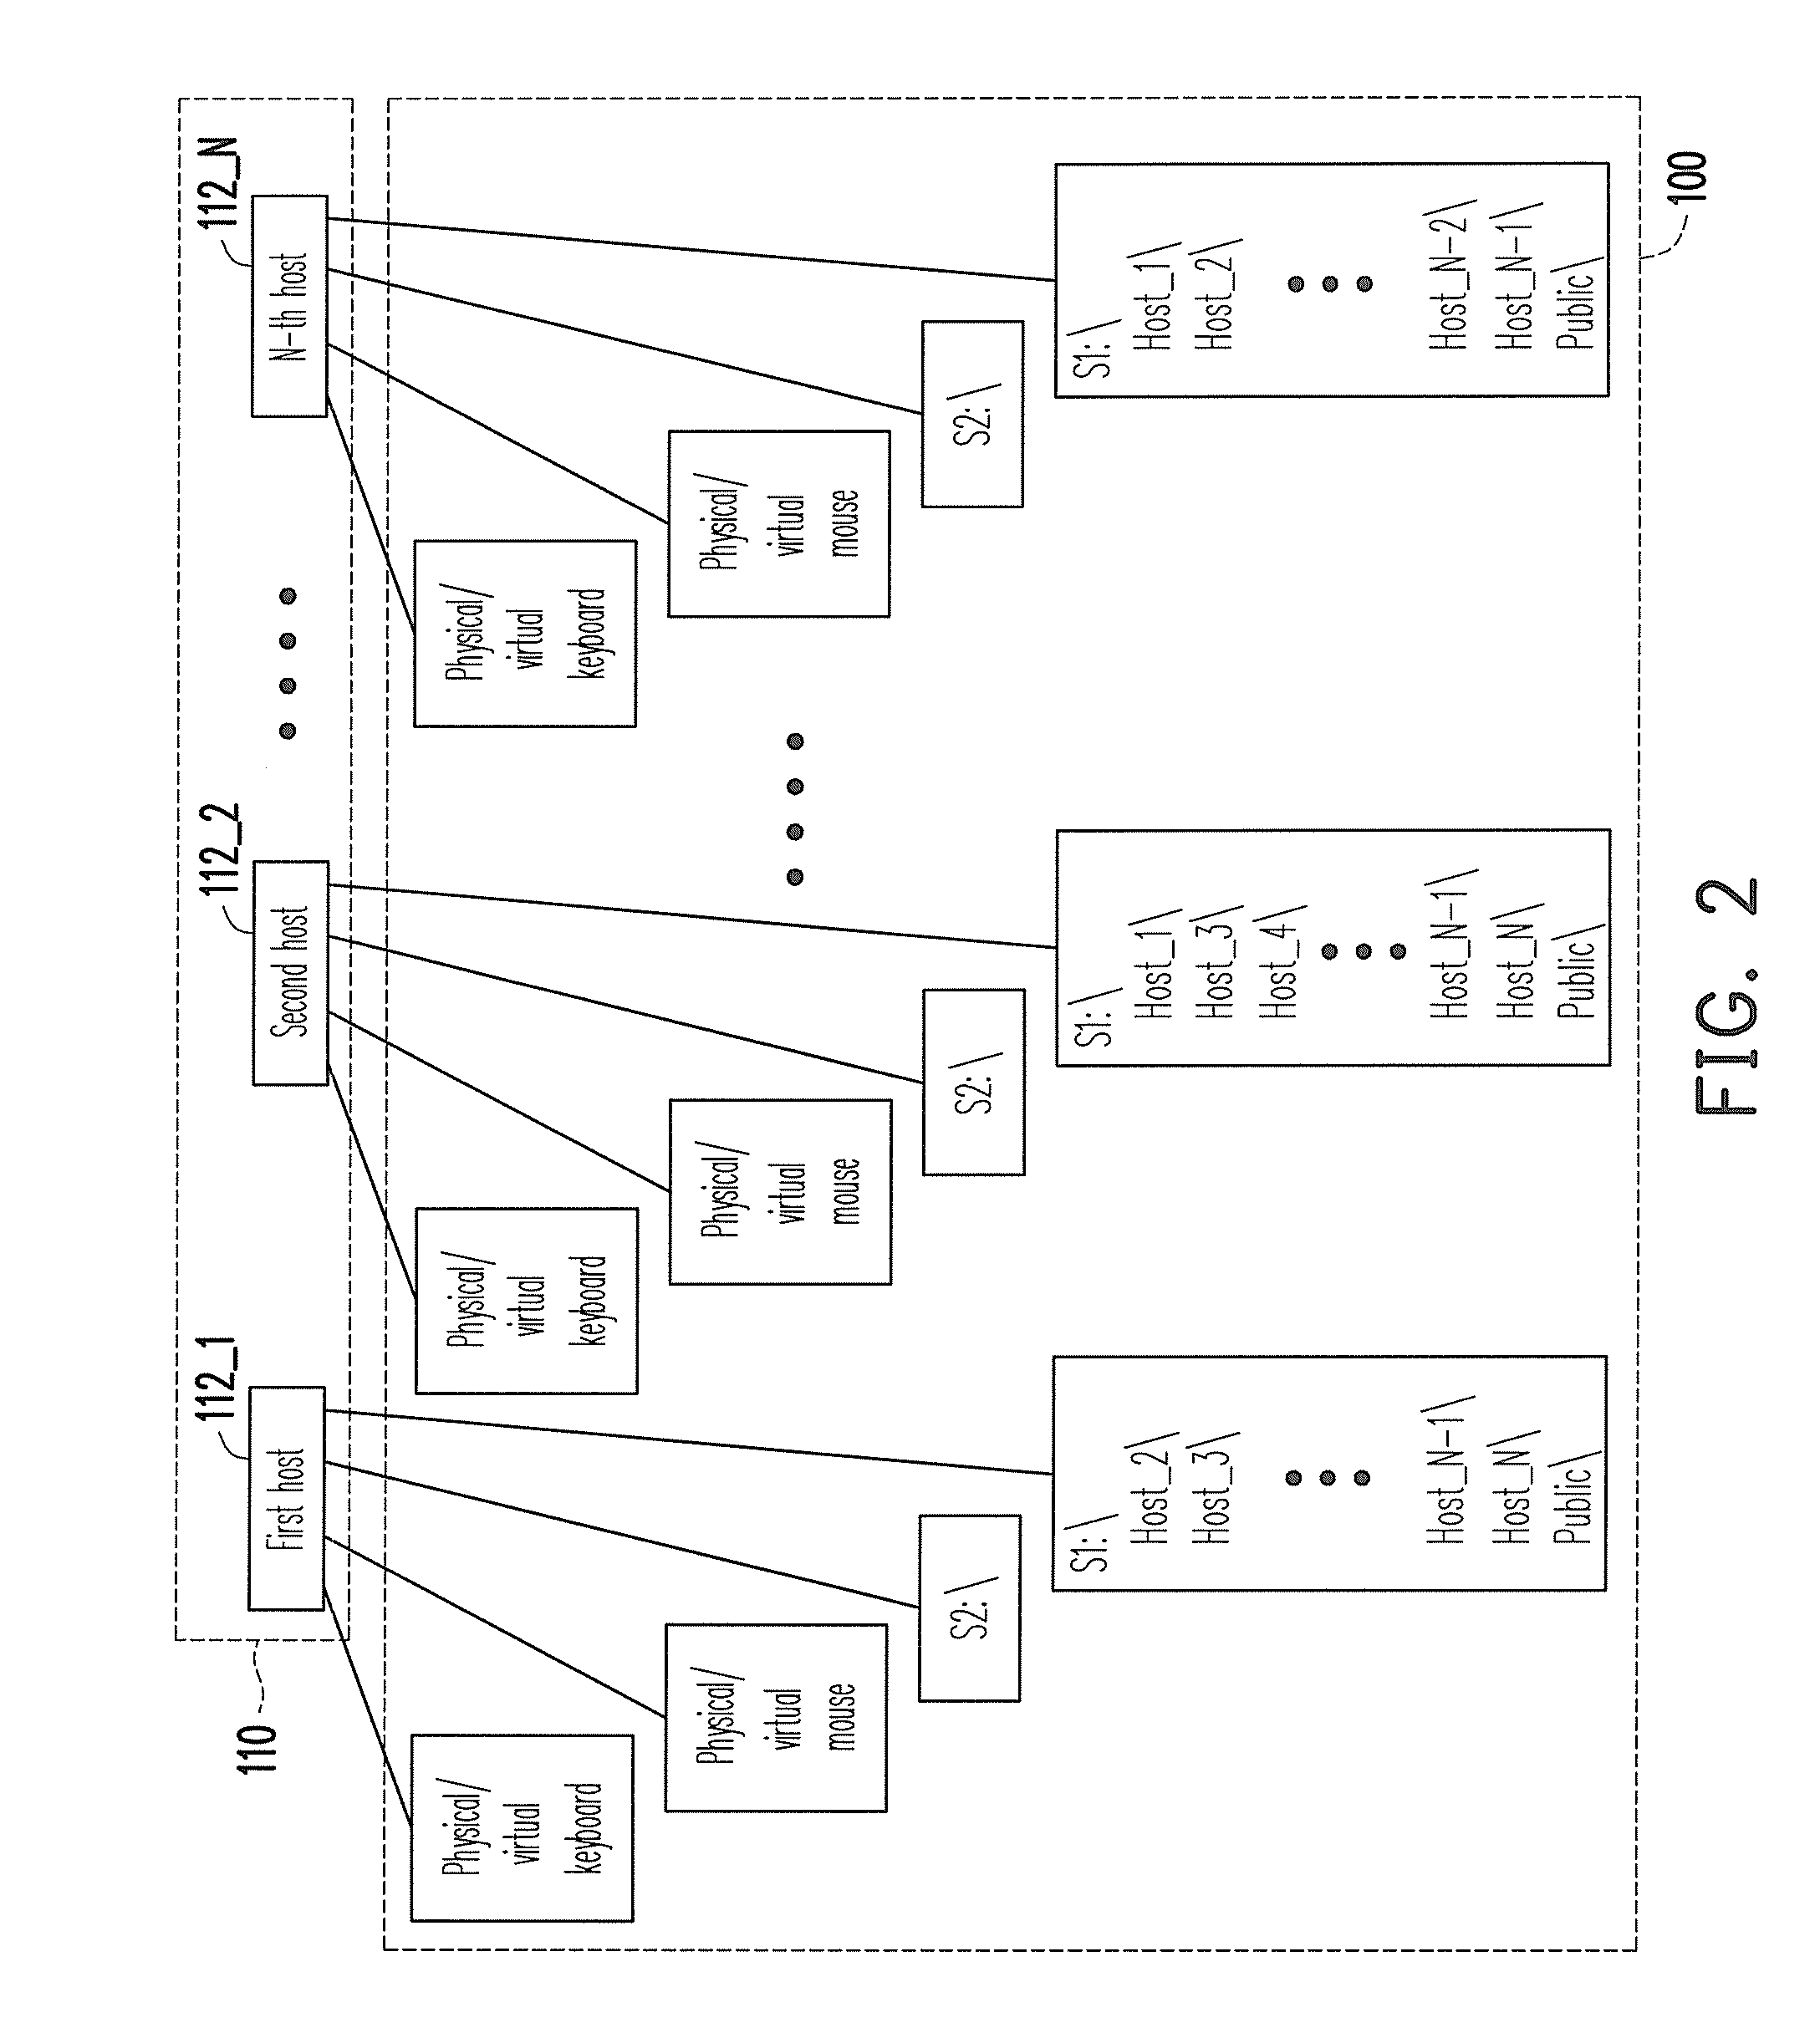 Information switch module and related file transfer method